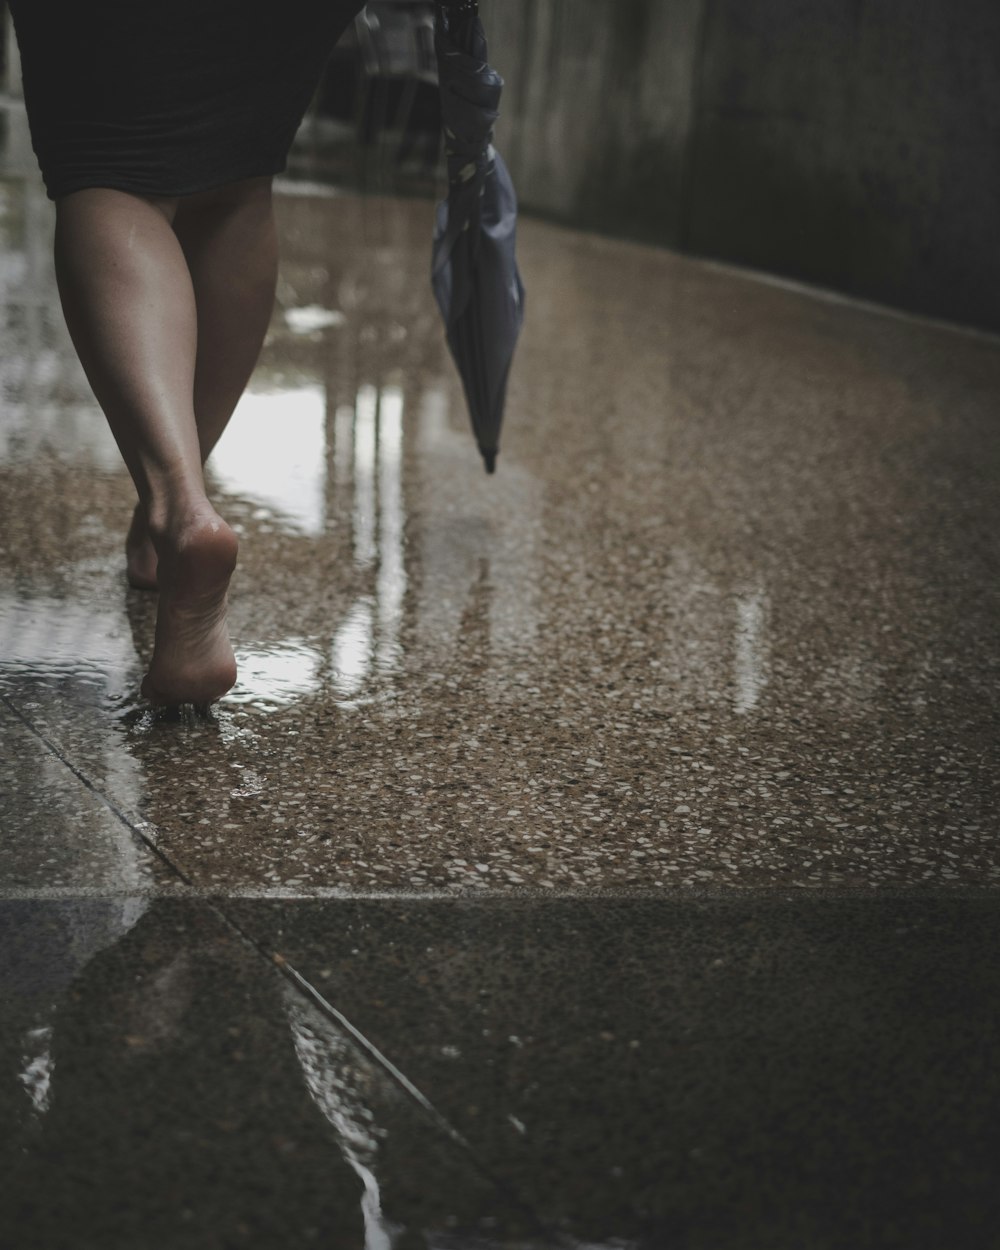 woman with umbrella on hand walking barefooted on wet floor